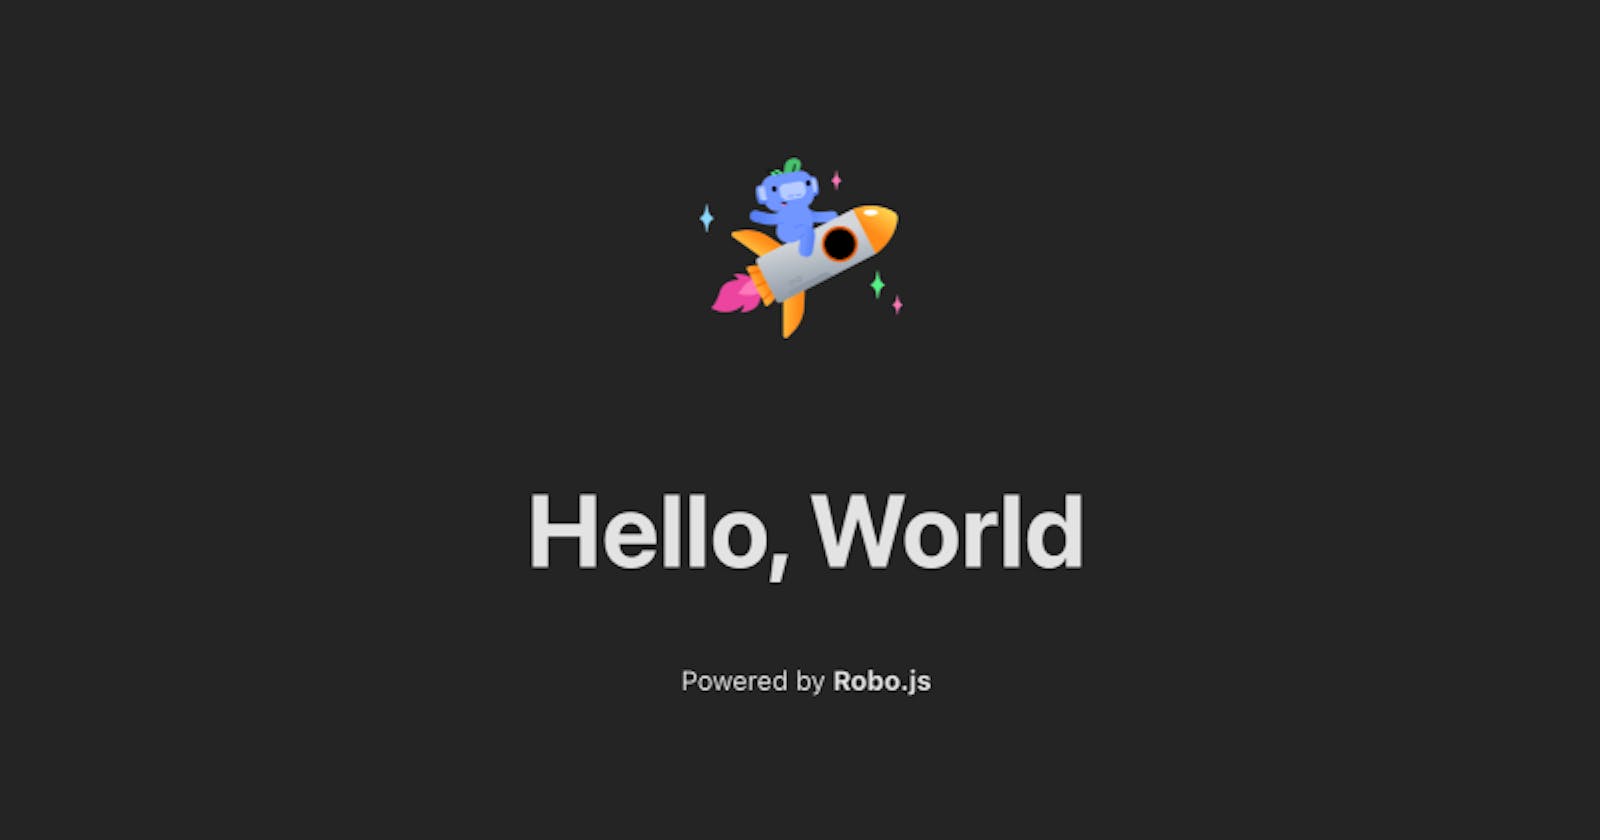 How to build a Discord Activity easily with Robo.js